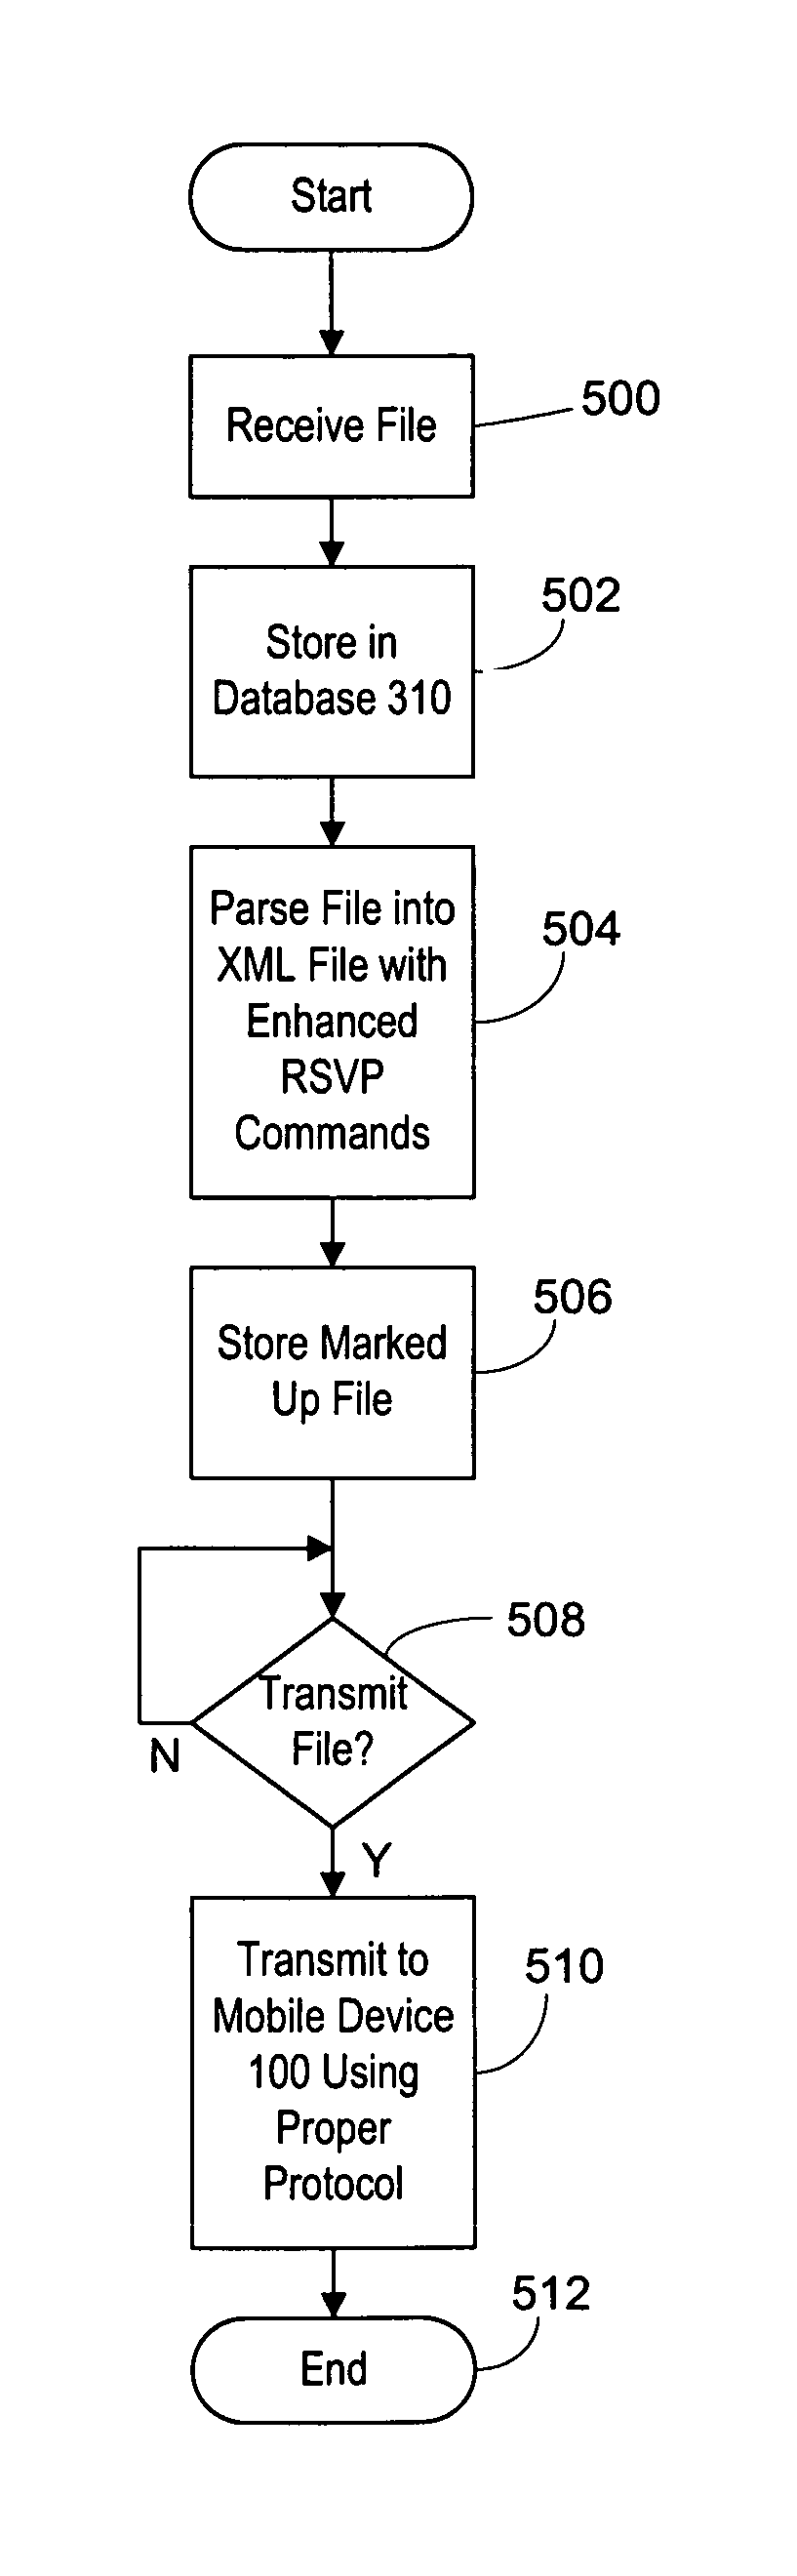 System and method for providing highly readable text on small mobile devices